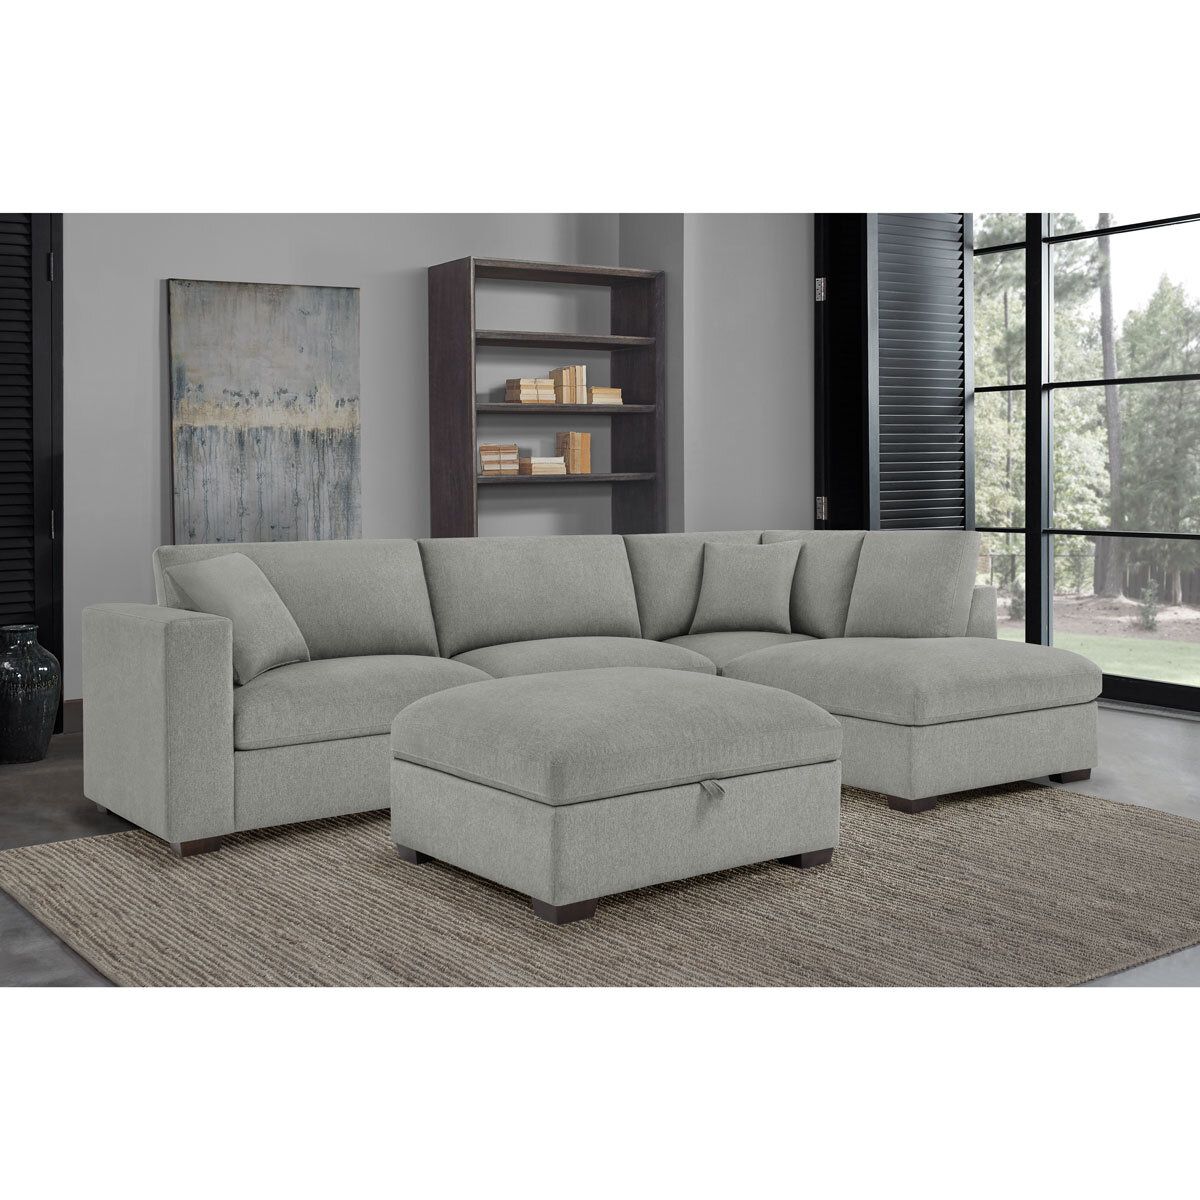 Thomasville Holmes Grey Fabric 3 Piece Sectional Sofa With Storage Ottoman Pertaining To Sofas With Storage Ottoman (View 19 of 20)